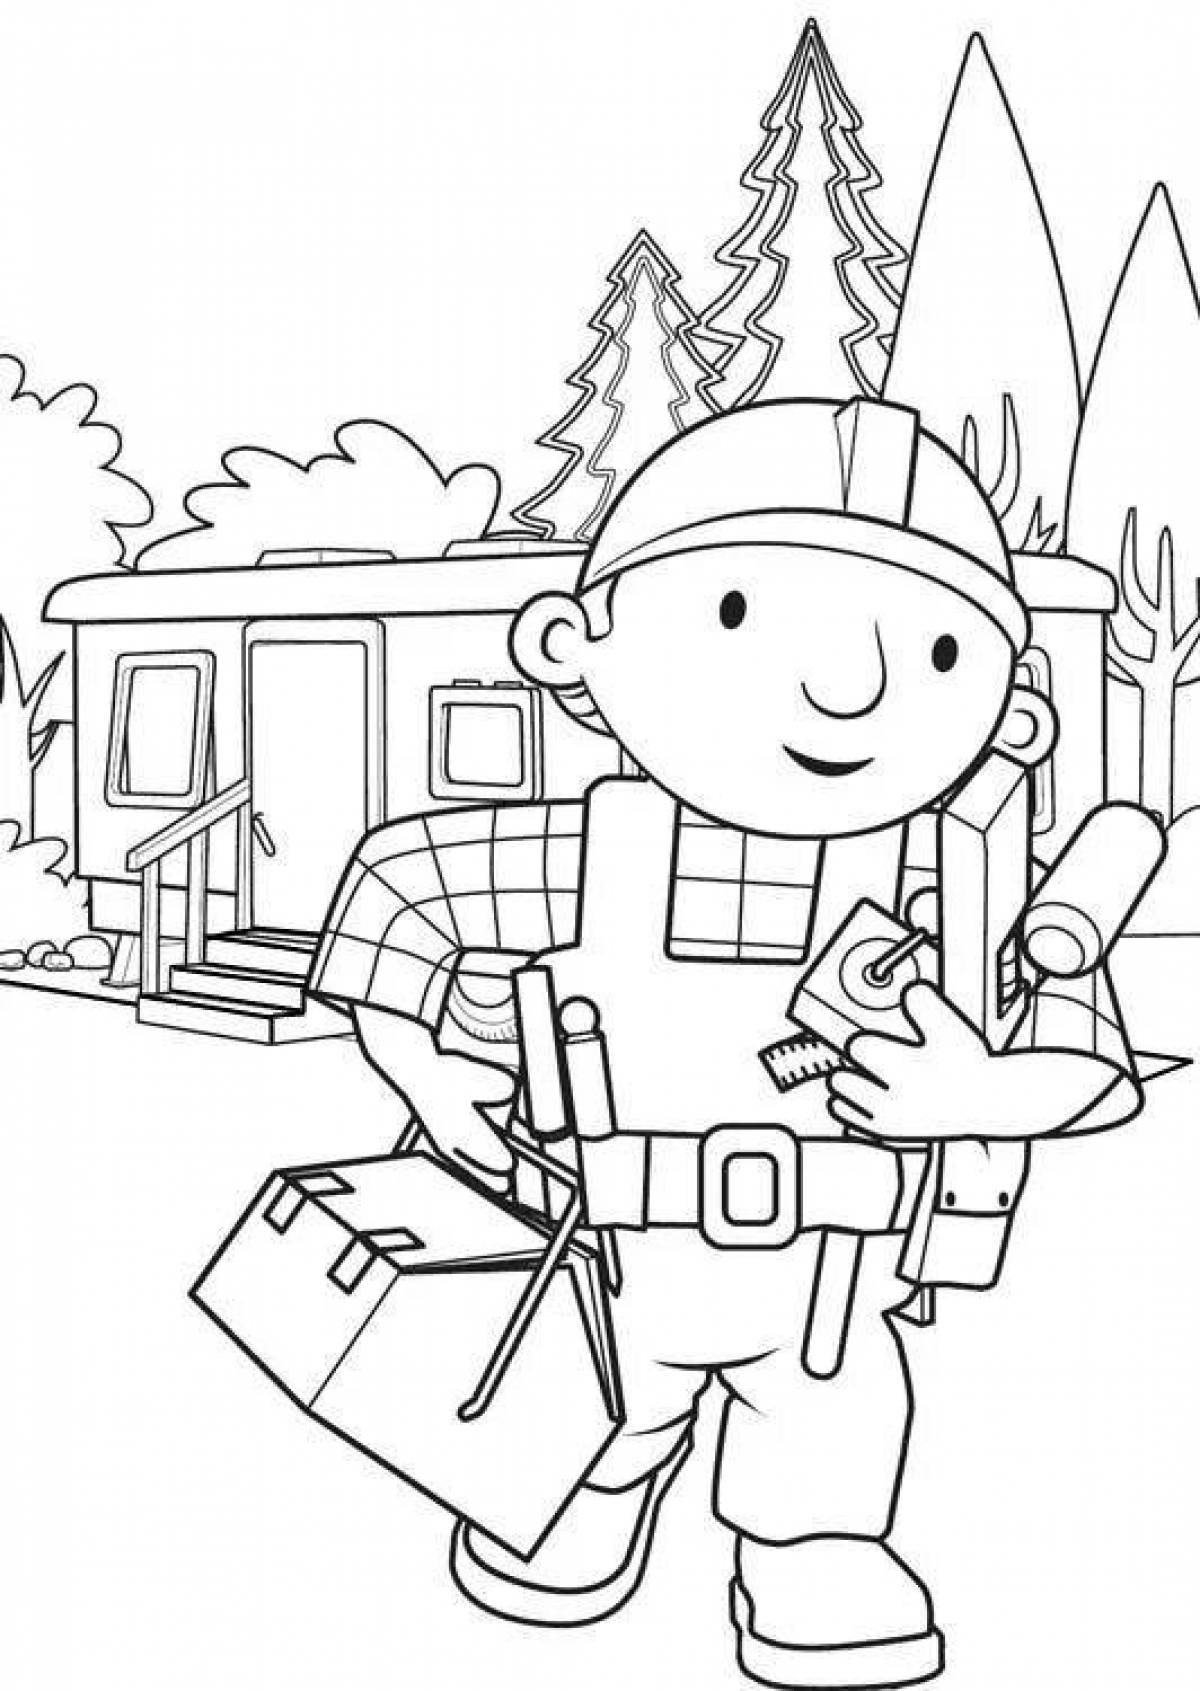 Occupational safety and health fun coloring book